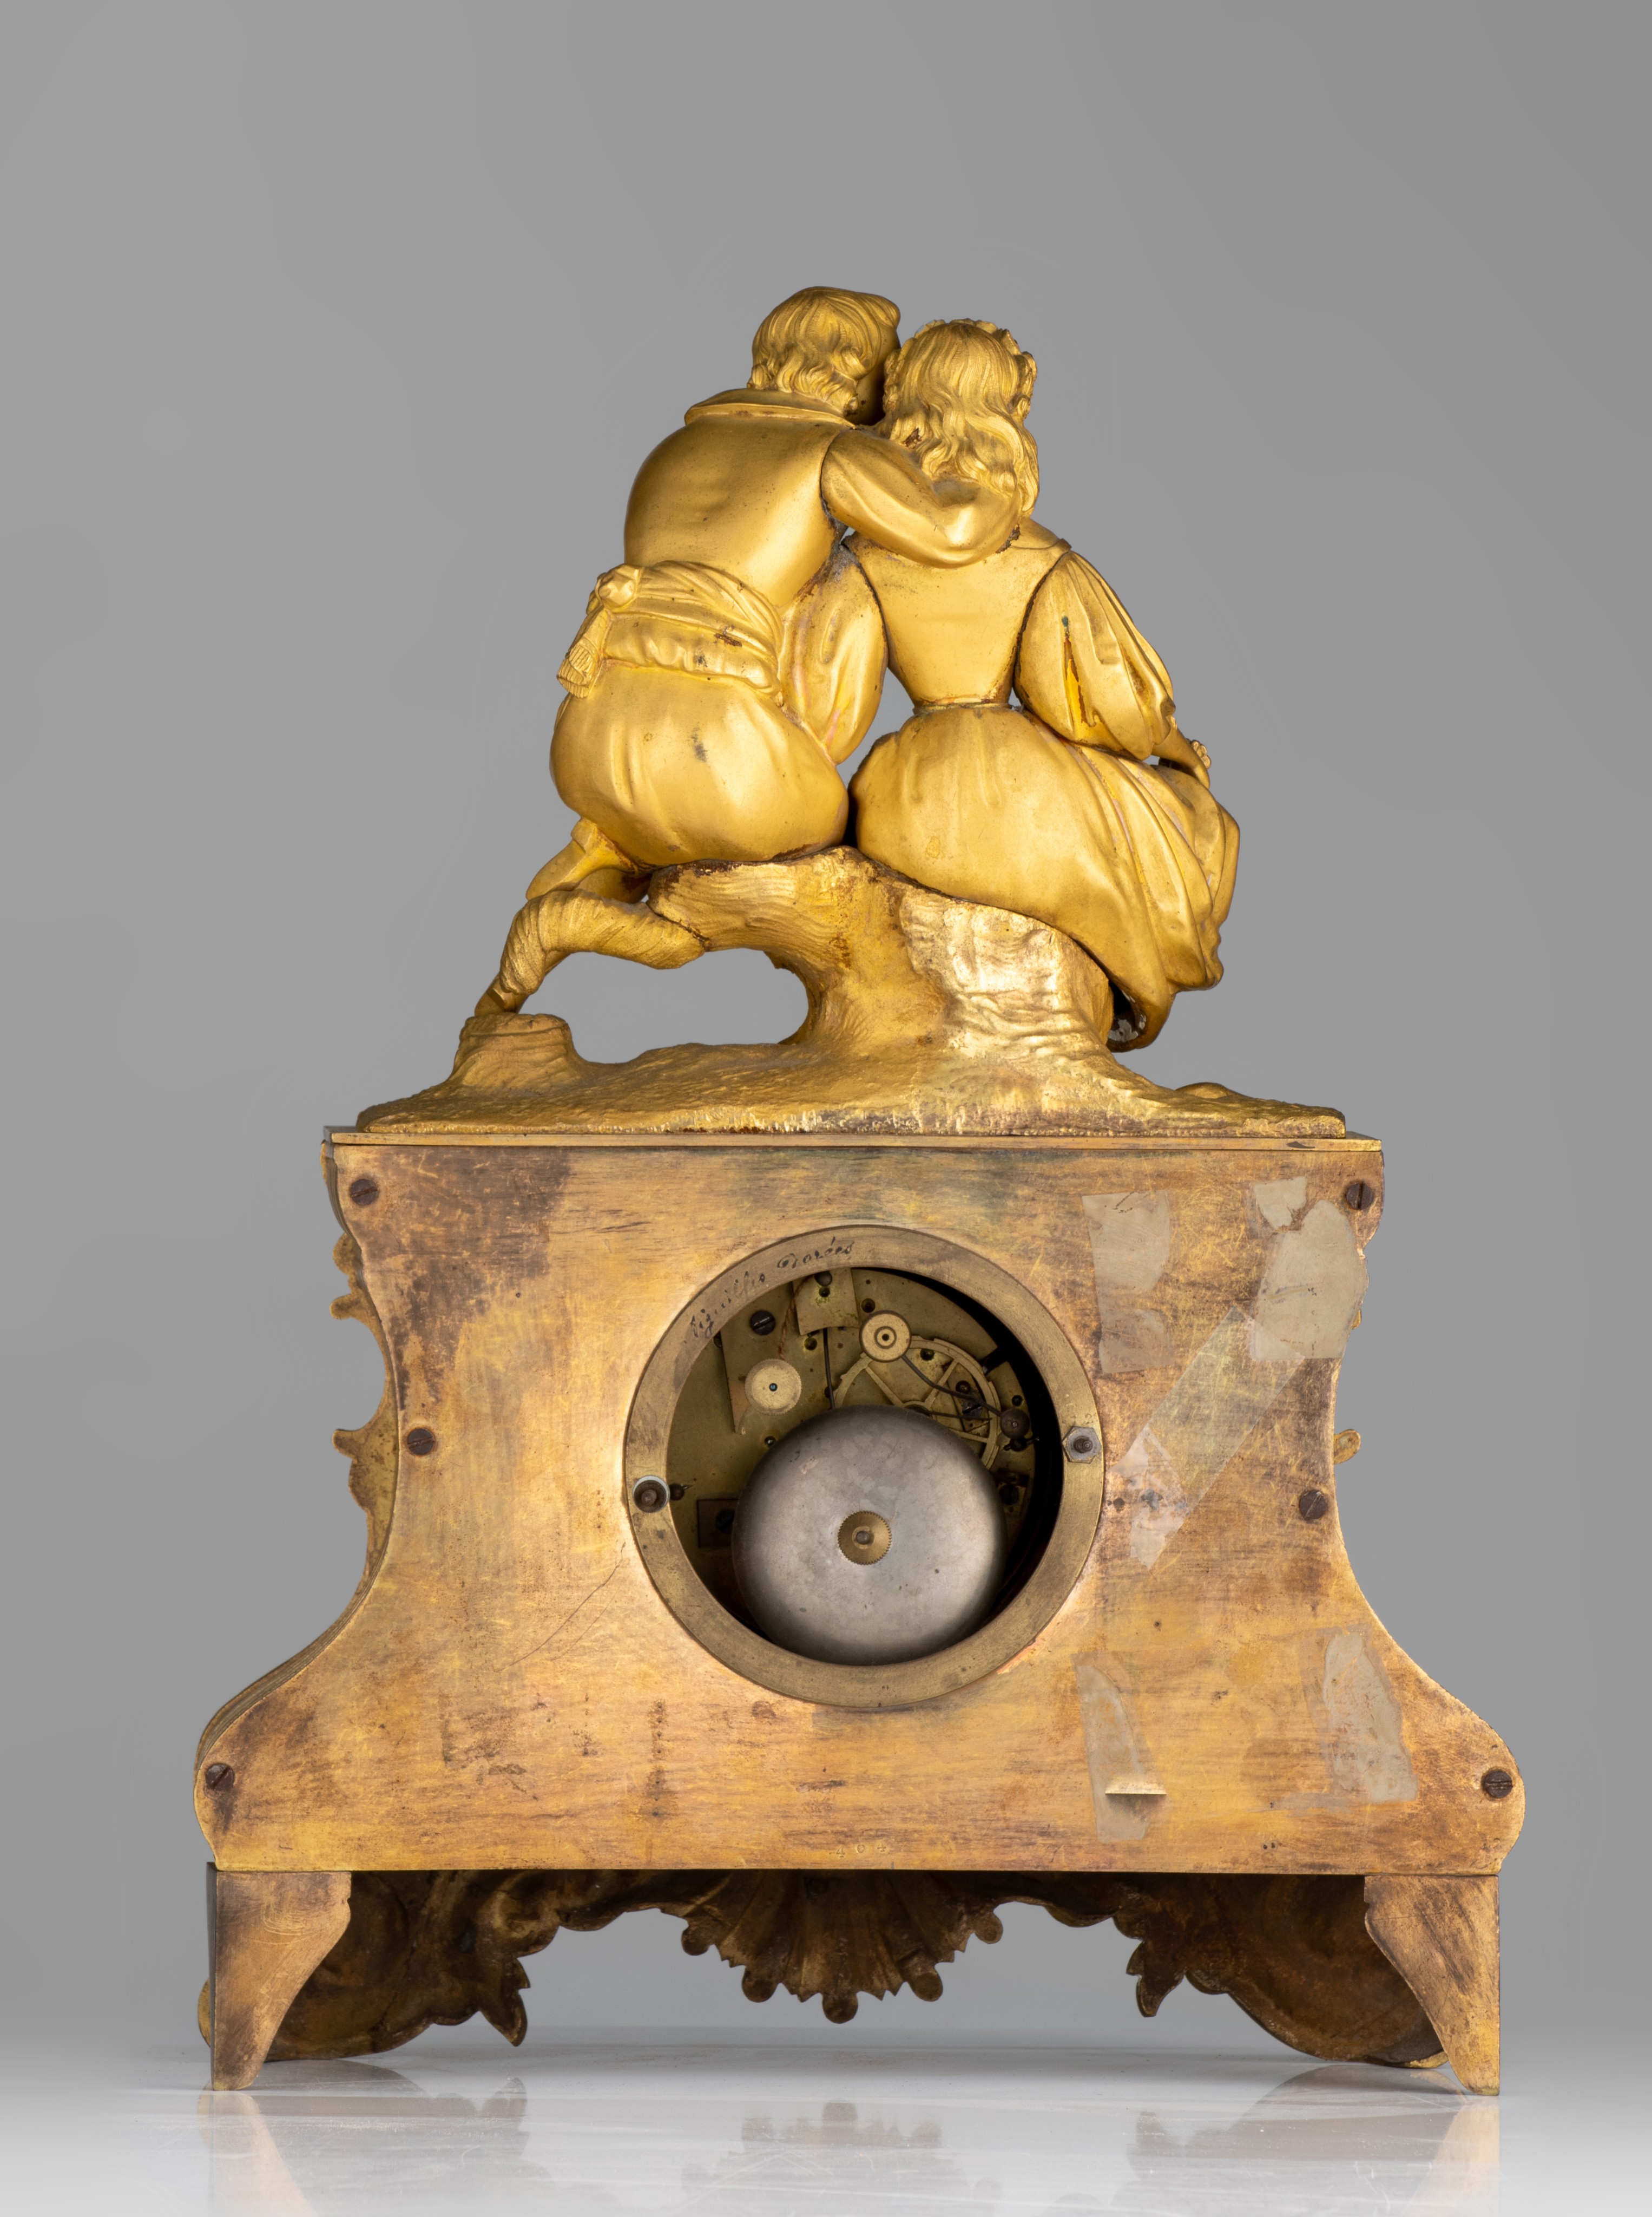 A Charles X gilt bronze mantle clock by Henri Robert, with a gallant scene, mid 19thC, H 38,5 cm - Image 4 of 9